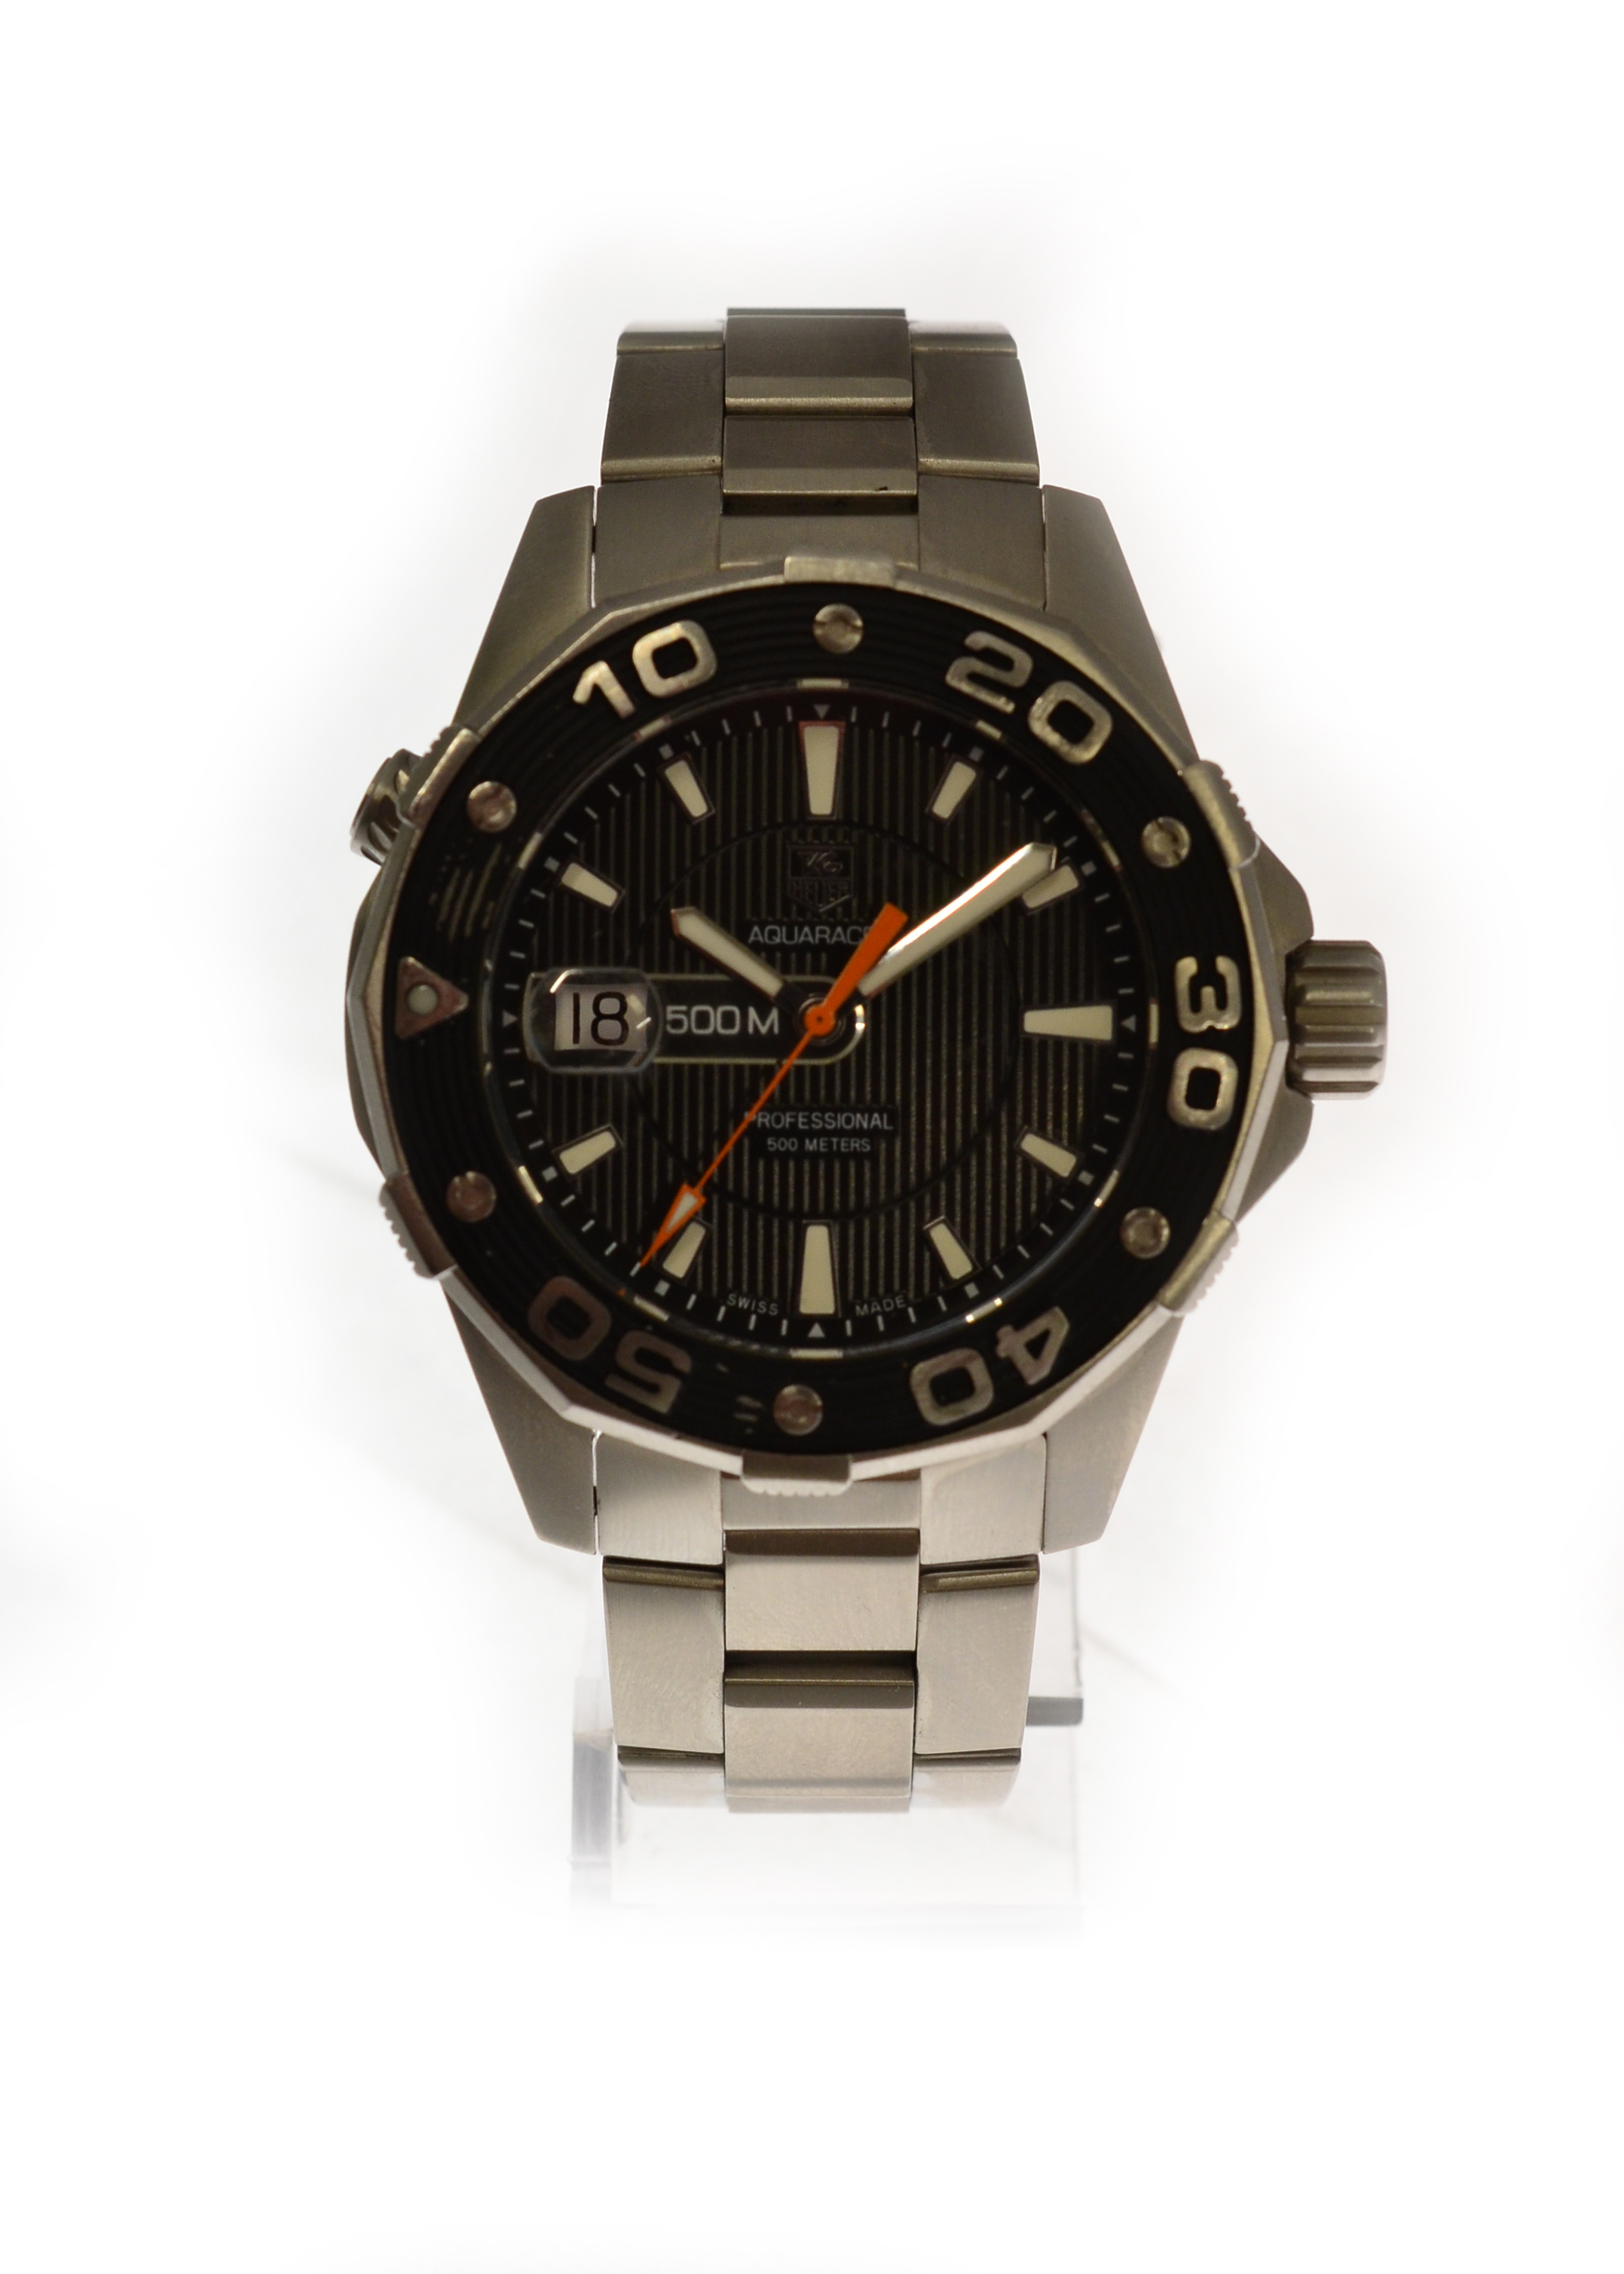 TAG HEUER - A gents stainless steel quartz Tag Heuer Aquaracer professional 500m wristwatch, model